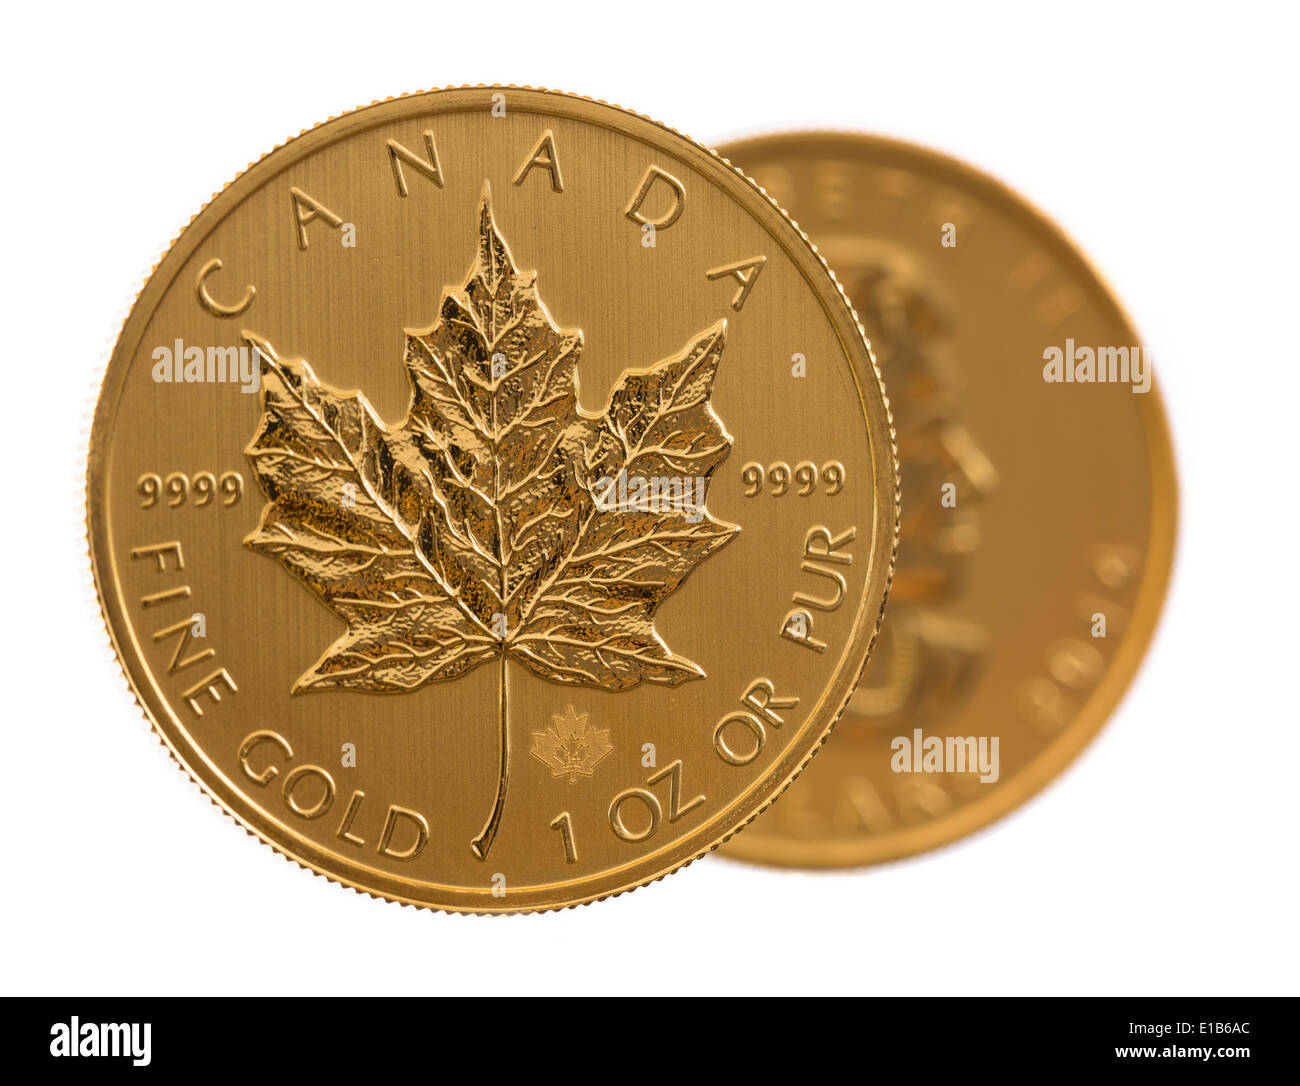 Pair of gold maple leaf one troy ounce golden coins from Canadian Treasury in uncirculated condition Stock Photo